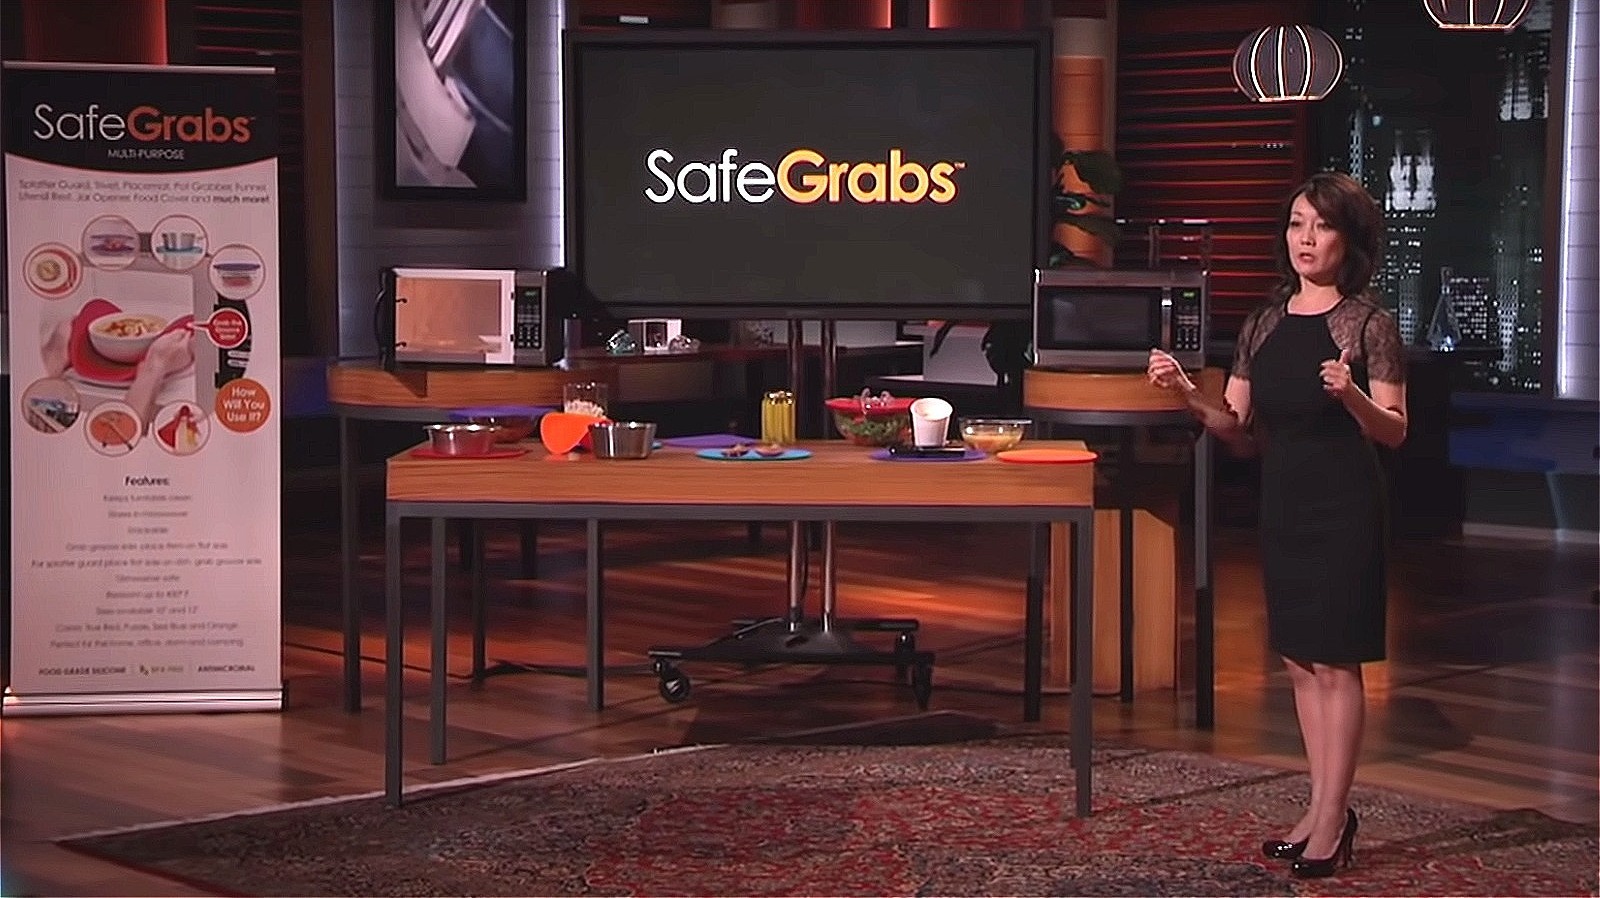 Whatever Happened To Safe Grabs Microwave Mat After Shark Tank Season 8?